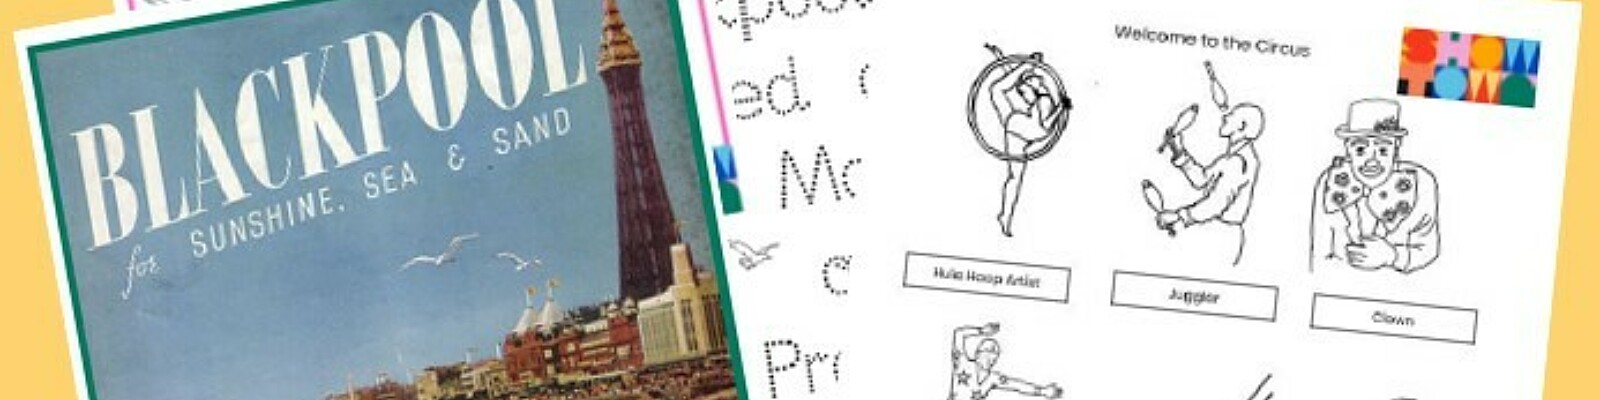 A selection of work sheets with illustrations about Blackpool